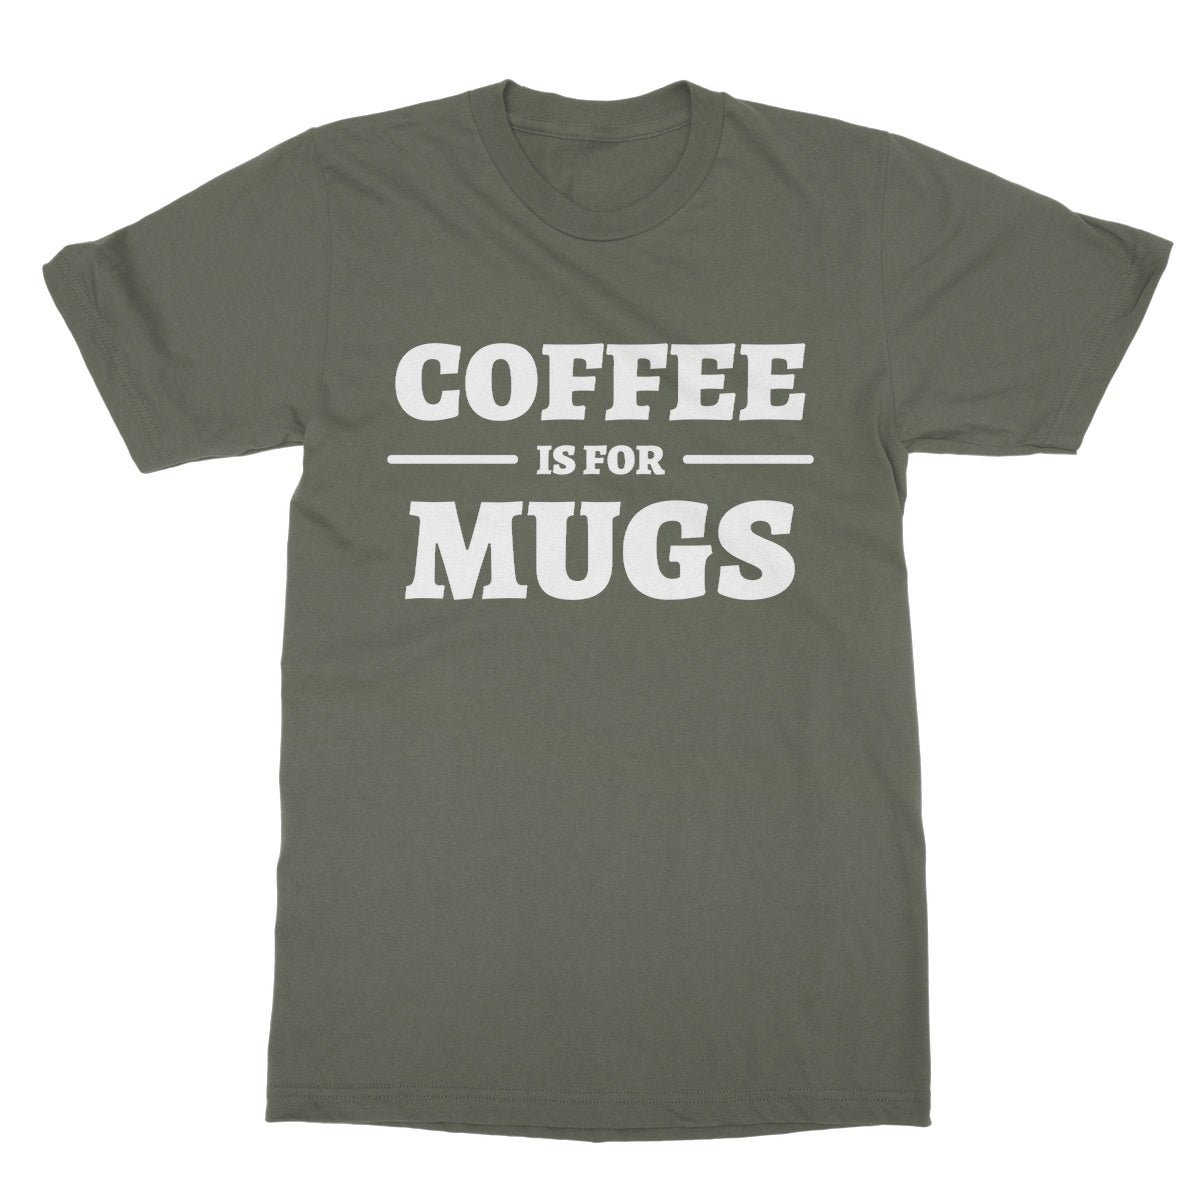 coffee is for mugs t shirt green